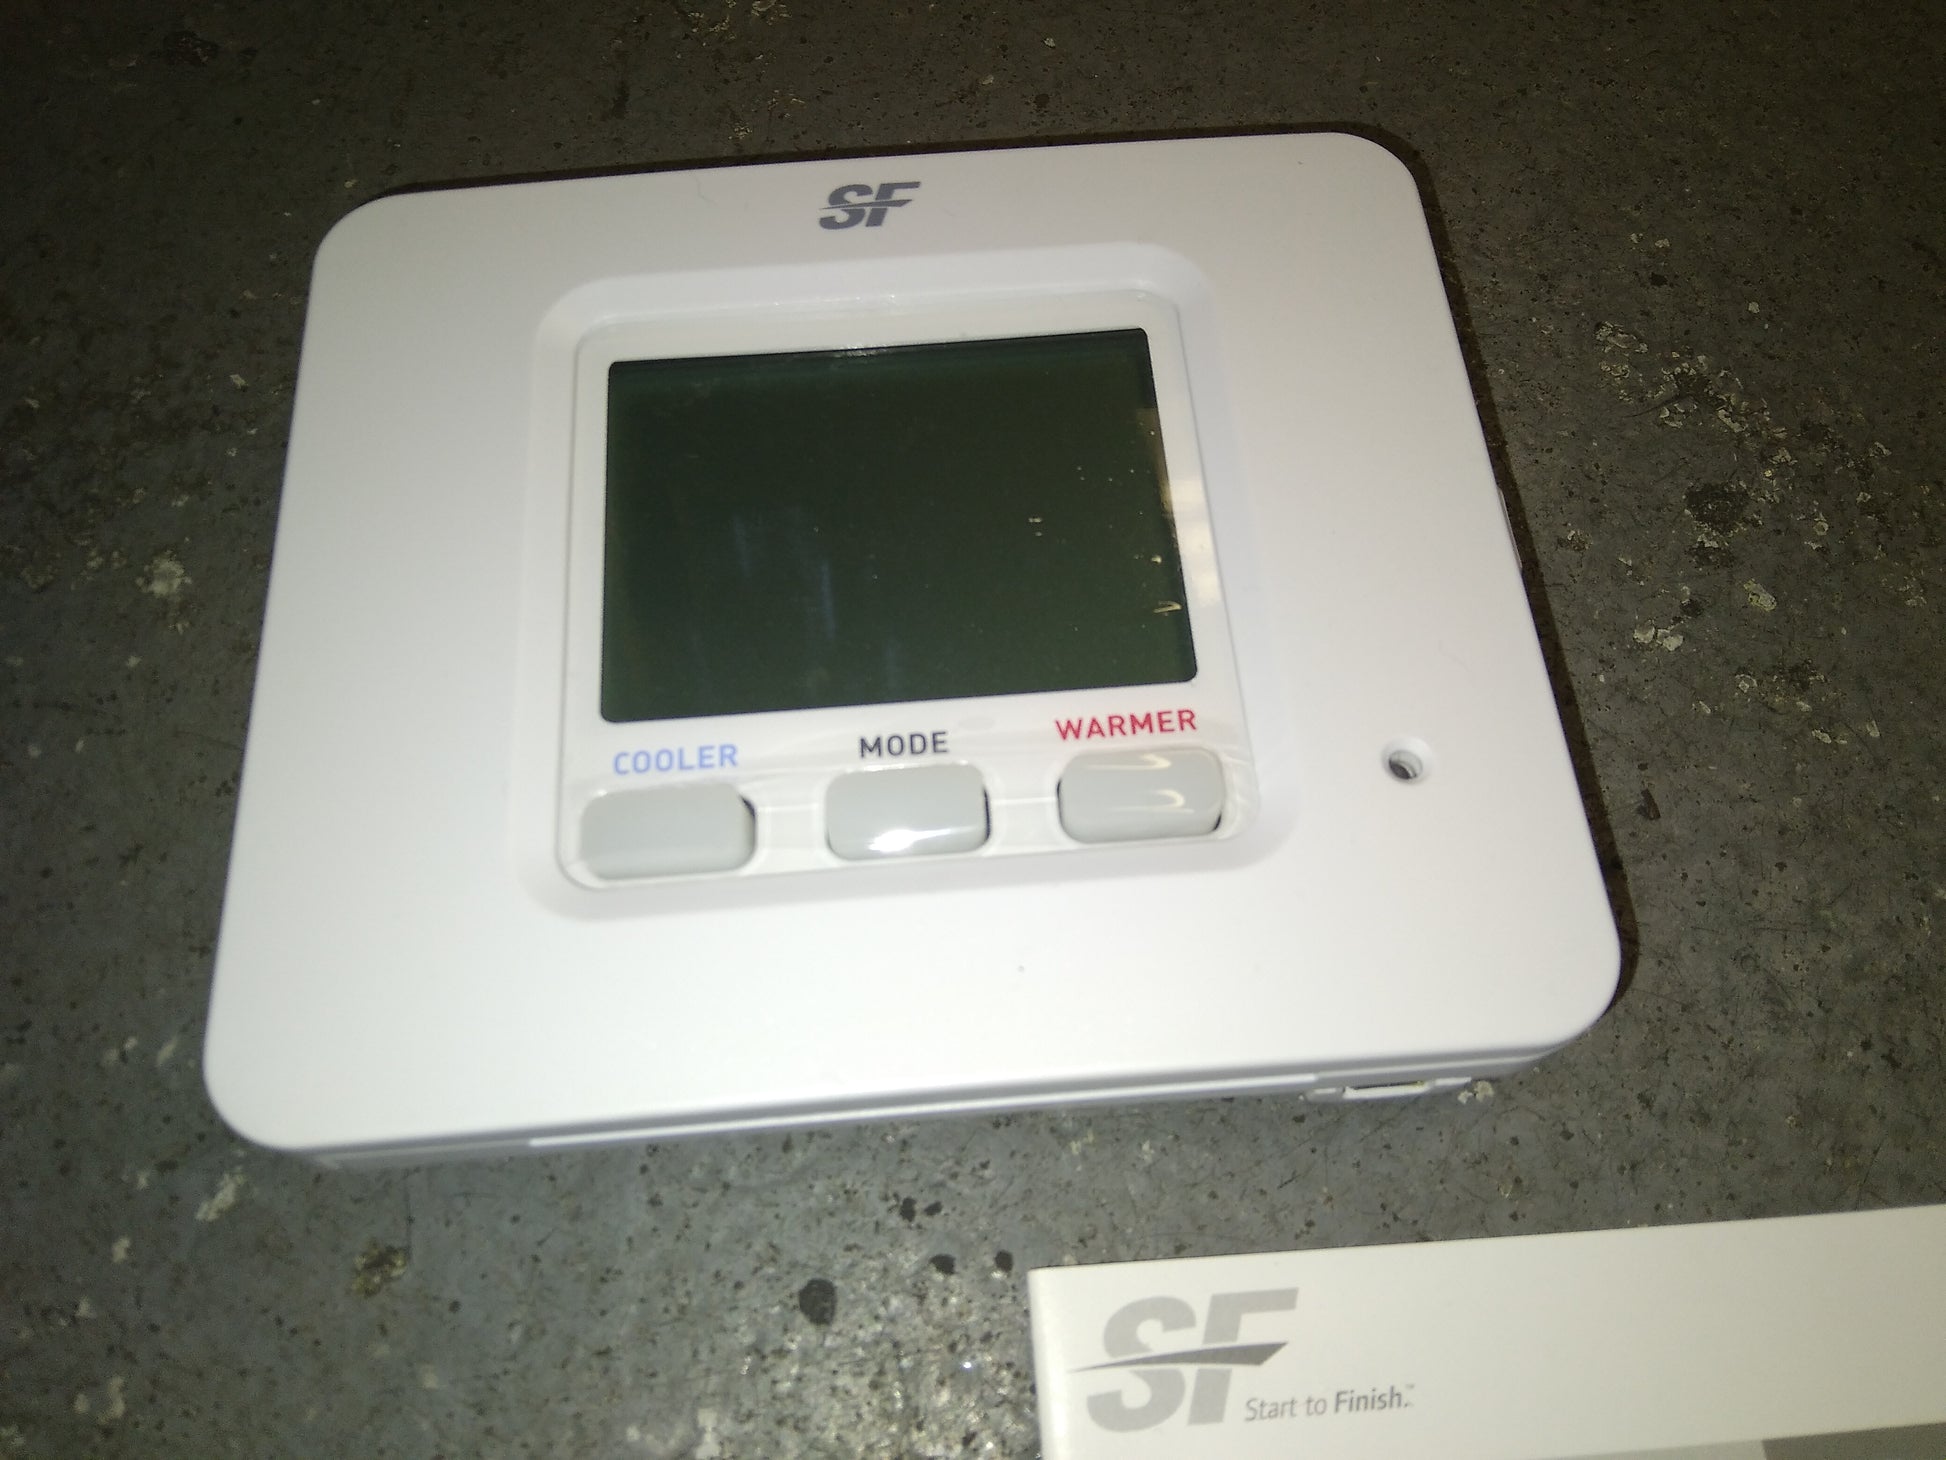 PREMIER SERIES DIGITAL 4 HEAT/ 2 COOL THERMOSTAT WITH WIFI CAPABILITY